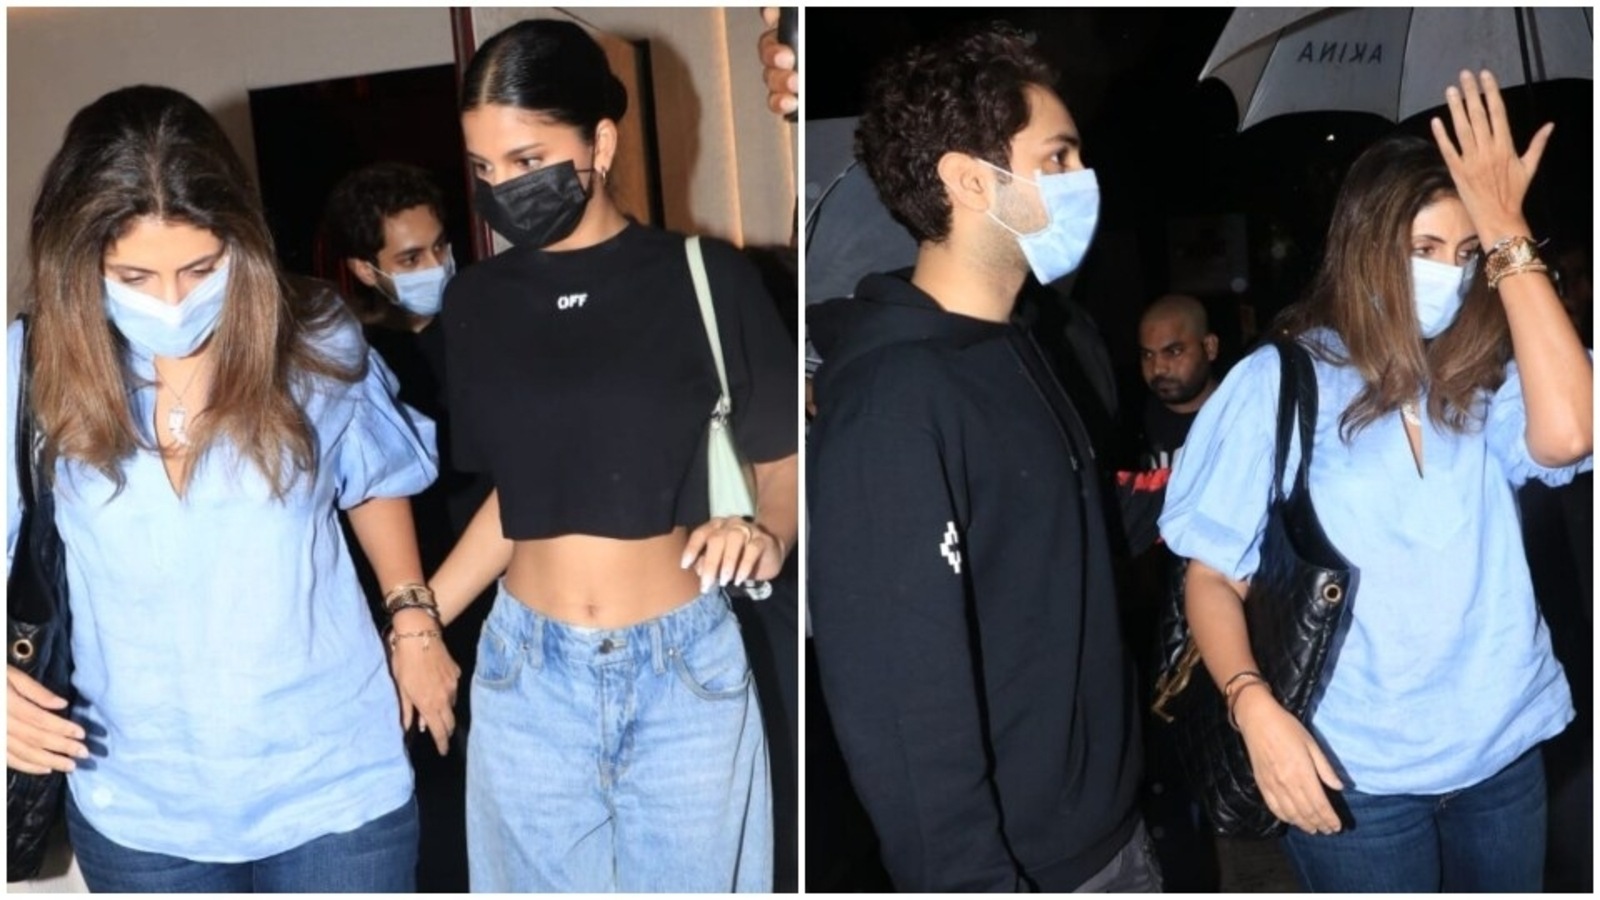 Suhana Khan looks date-night ready in crop top and boyfriend jeans for outing with Agastya Nanda, Shweta Bachchan